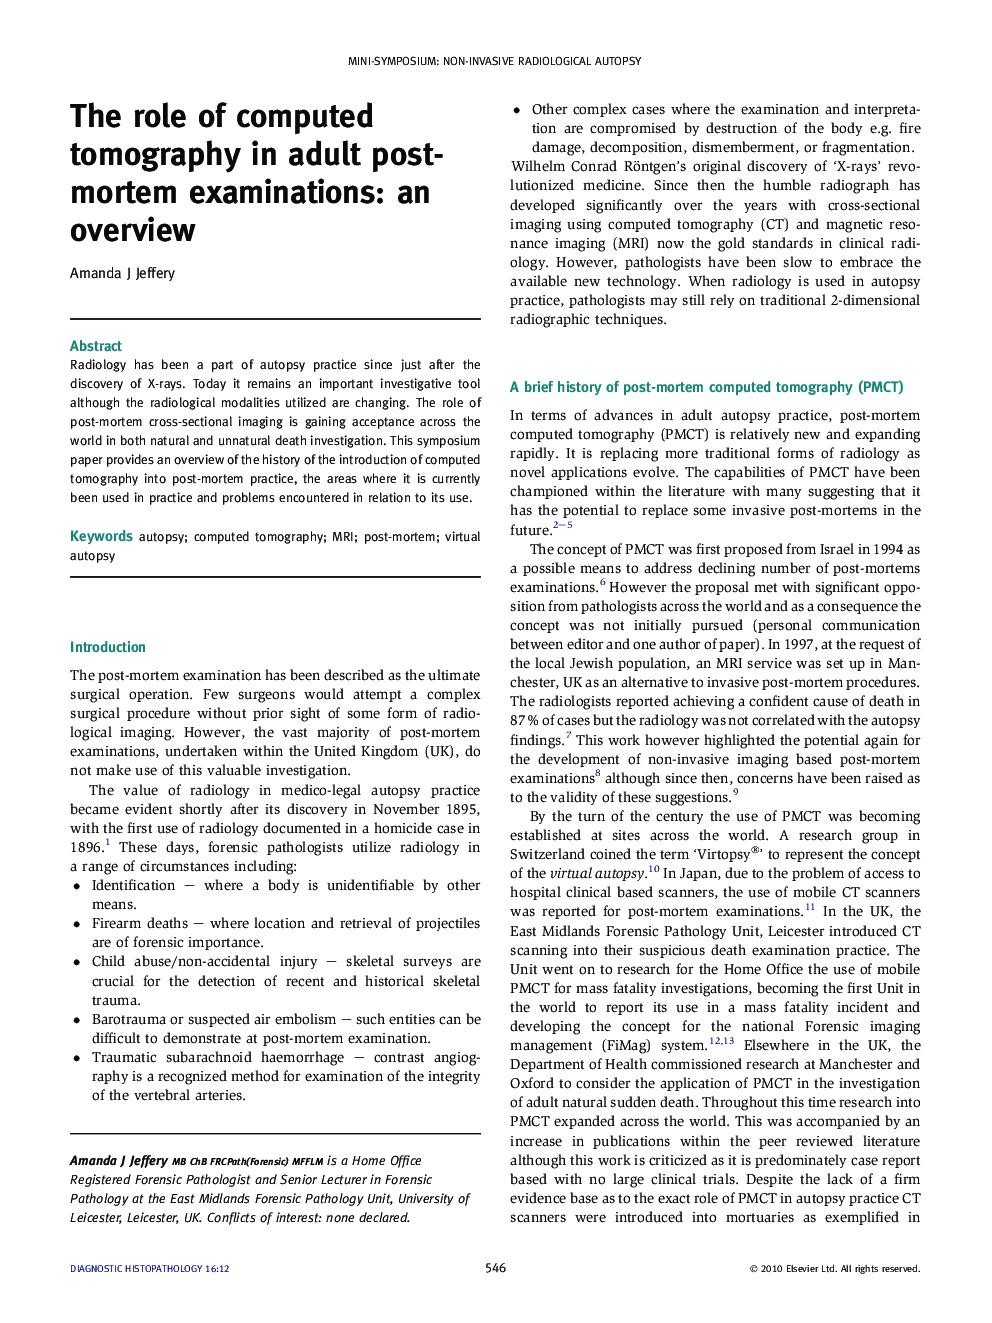 The role of computed tomography in adult post-mortem examinations: an overview